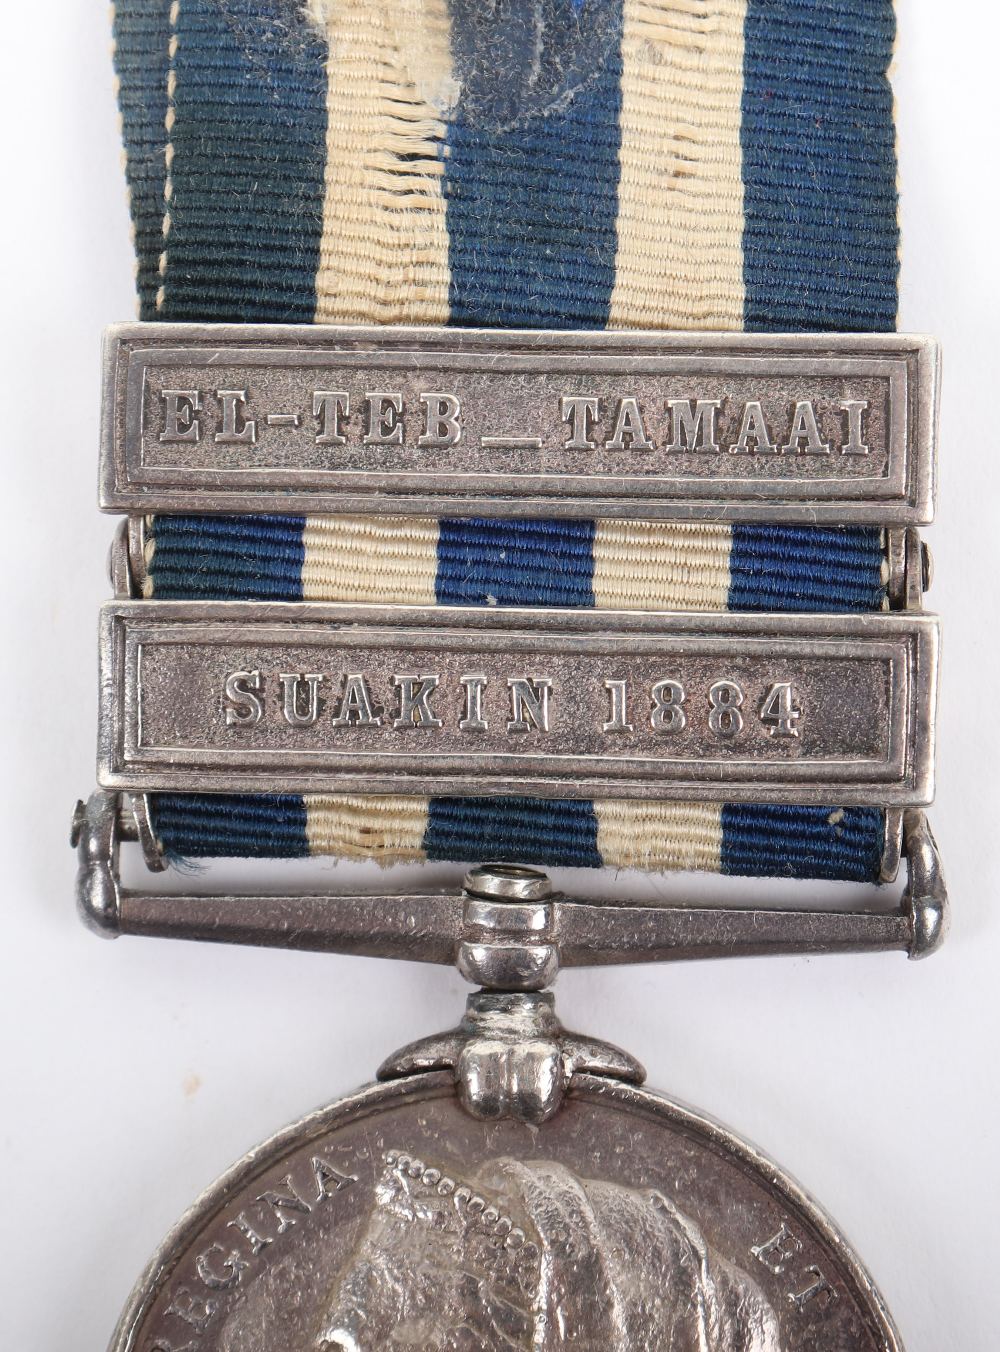 British Egypt and Sudan 1882-89 Campaign Medal - Image 4 of 4